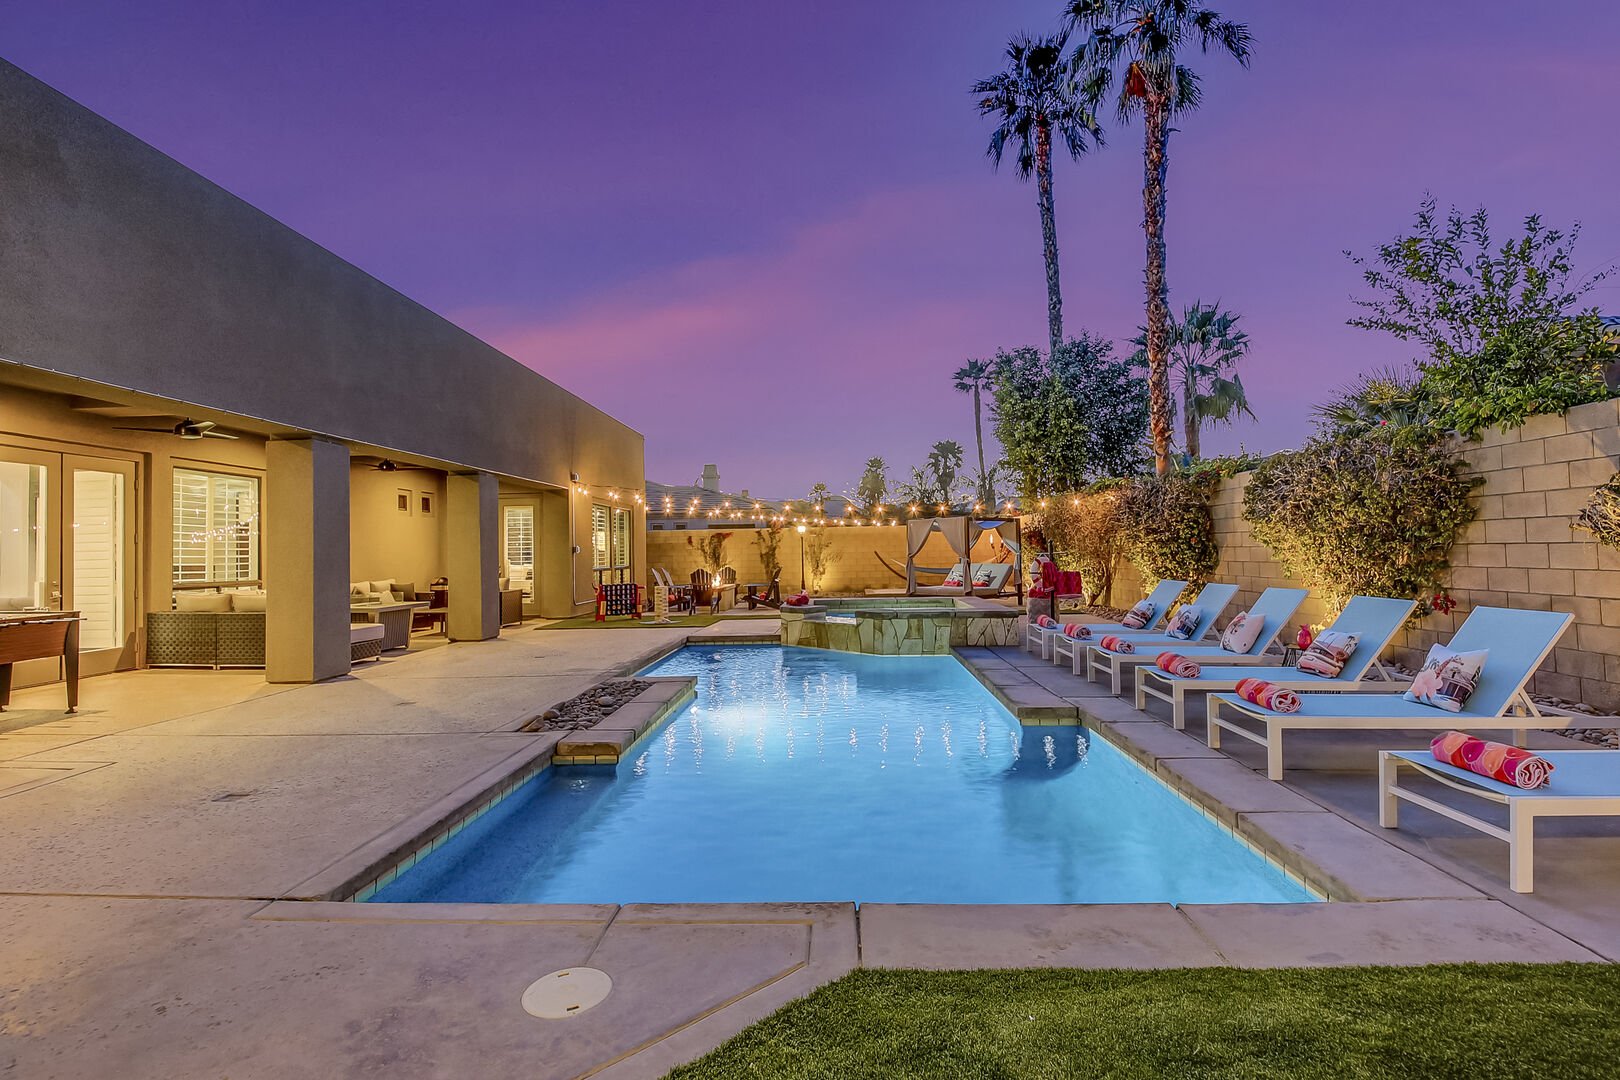 Treat yourself to the perfect vacation rental close to the Coachella Valley Music Festival and polo grounds,